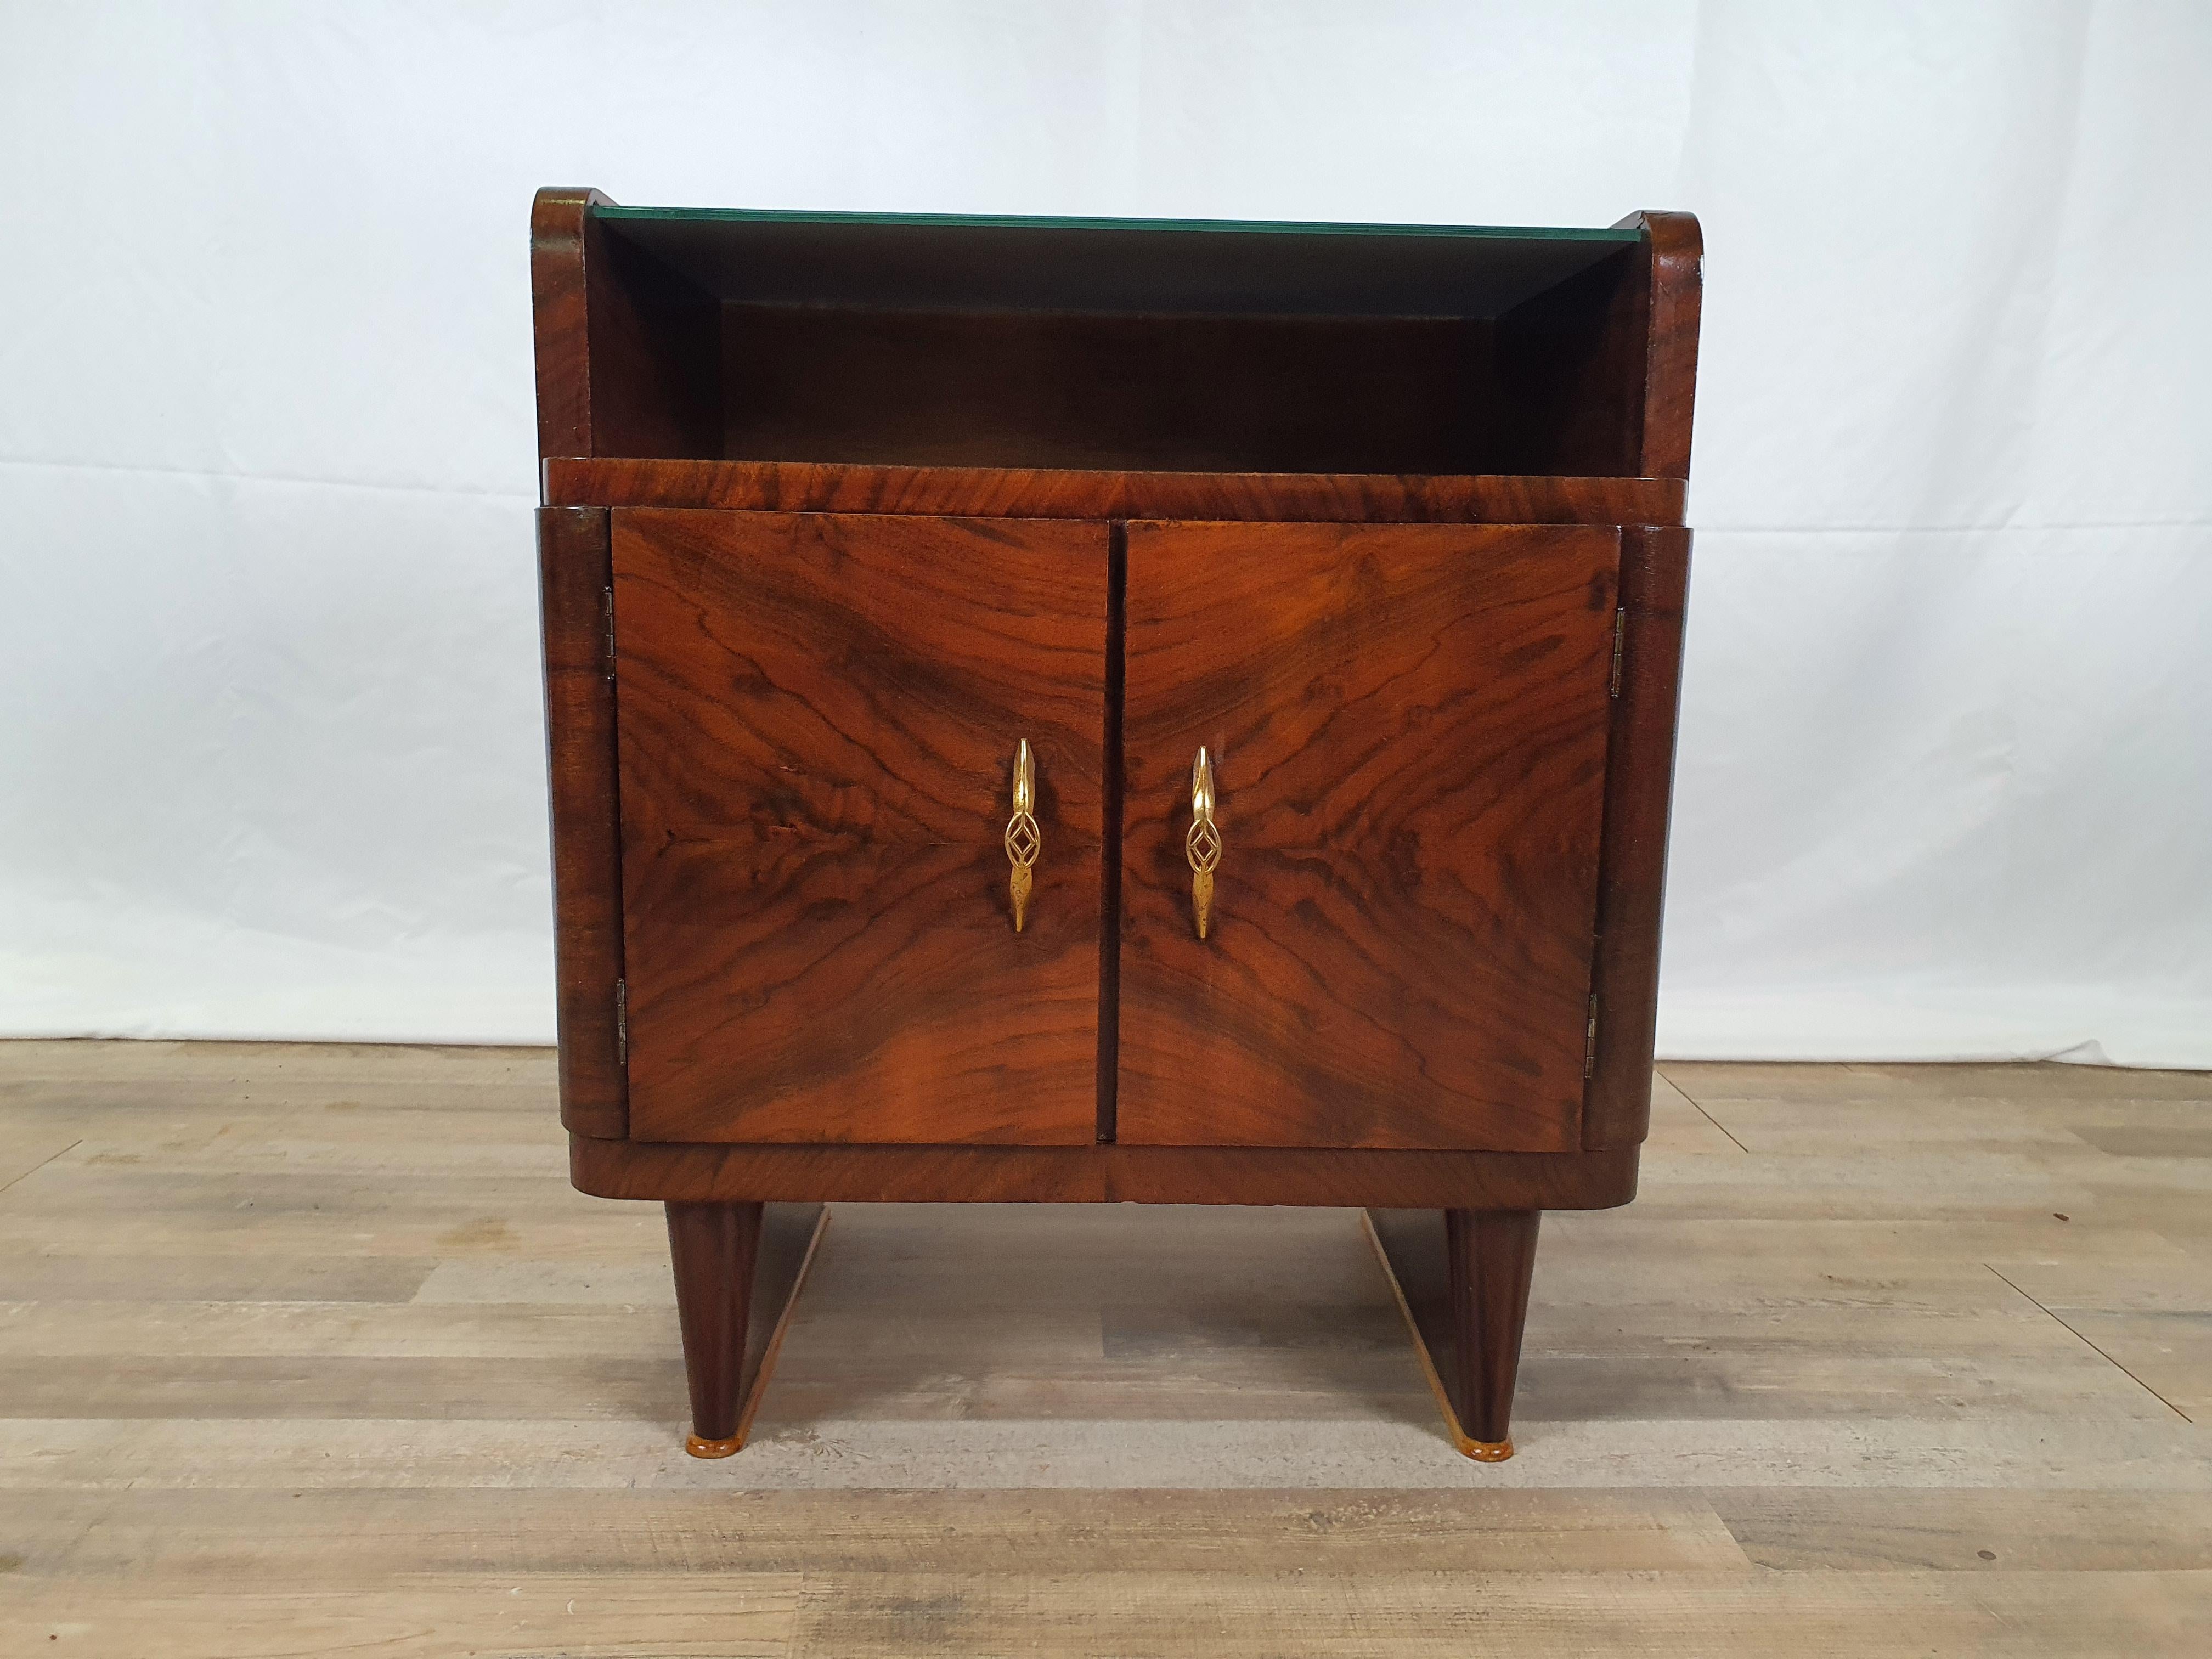 Elegant single bedside table from the 1940s in briar with double door and worked and decorated brass handles.

On the upper floor there is an interlocking mirror, very scenographic and fine.

The bedside table has been polished with oil and